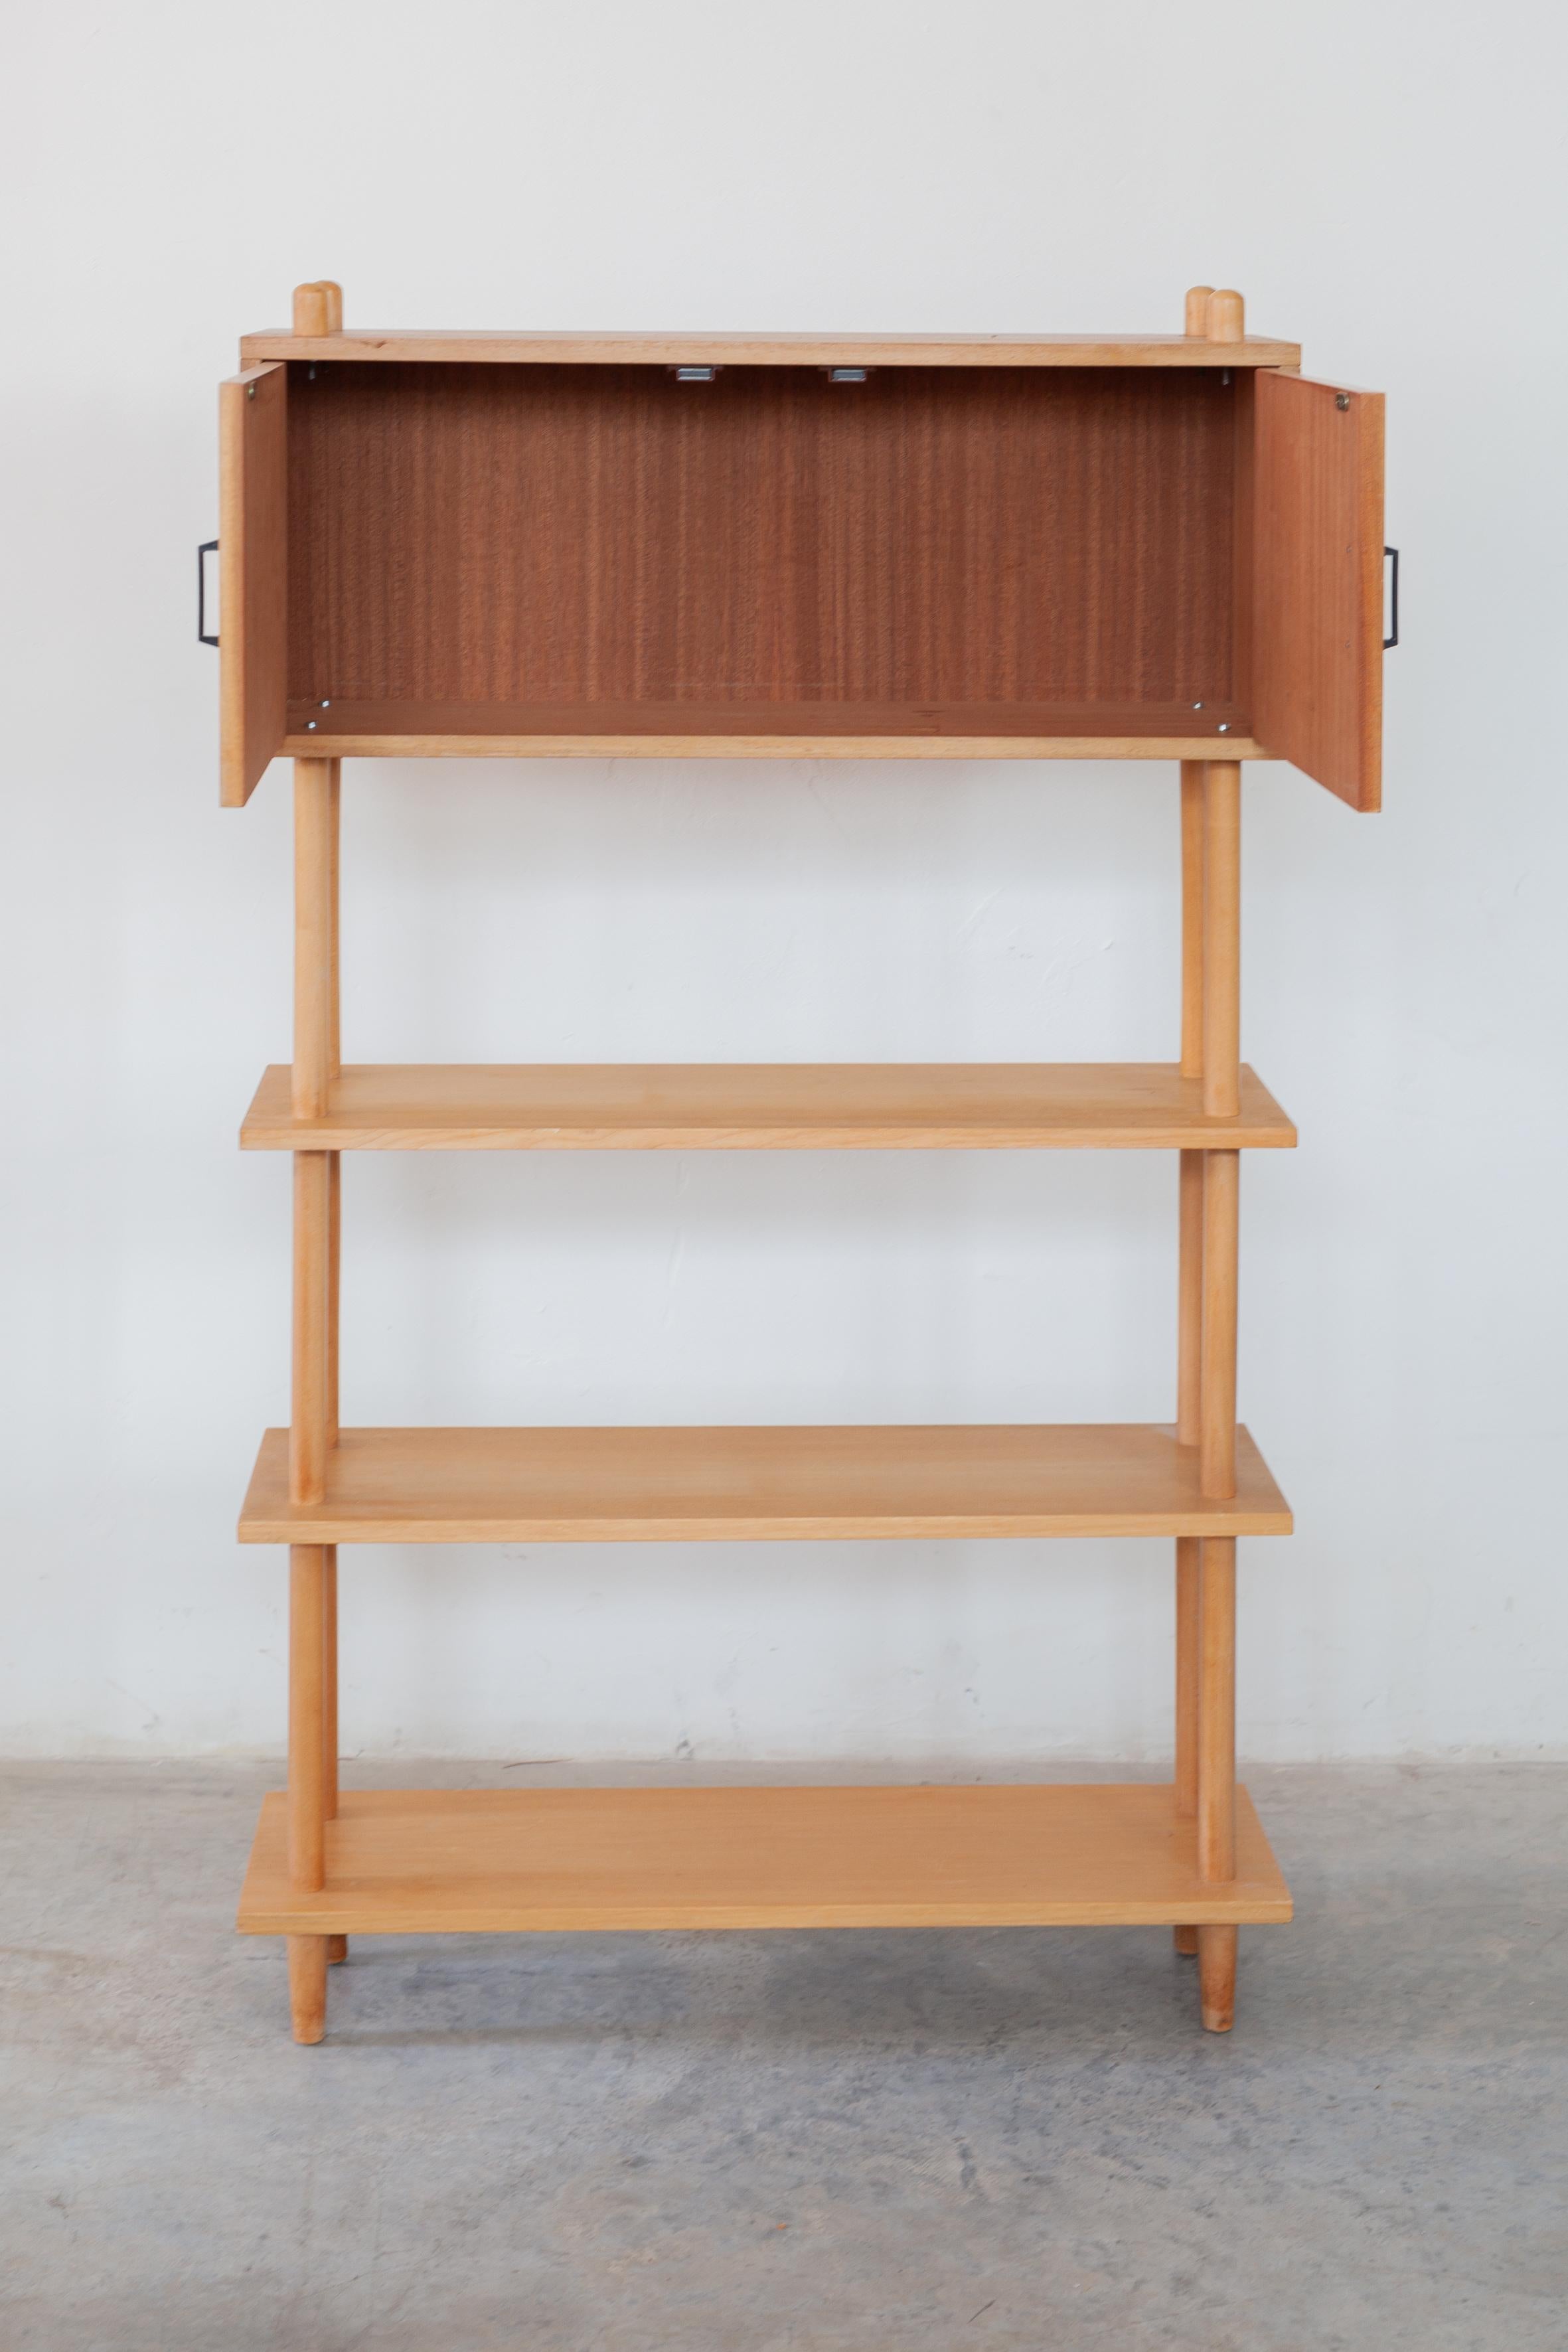 Hand-Crafted Midcentury Book Shelving Unit Roomdivider by Willem Lutjens, 1960s